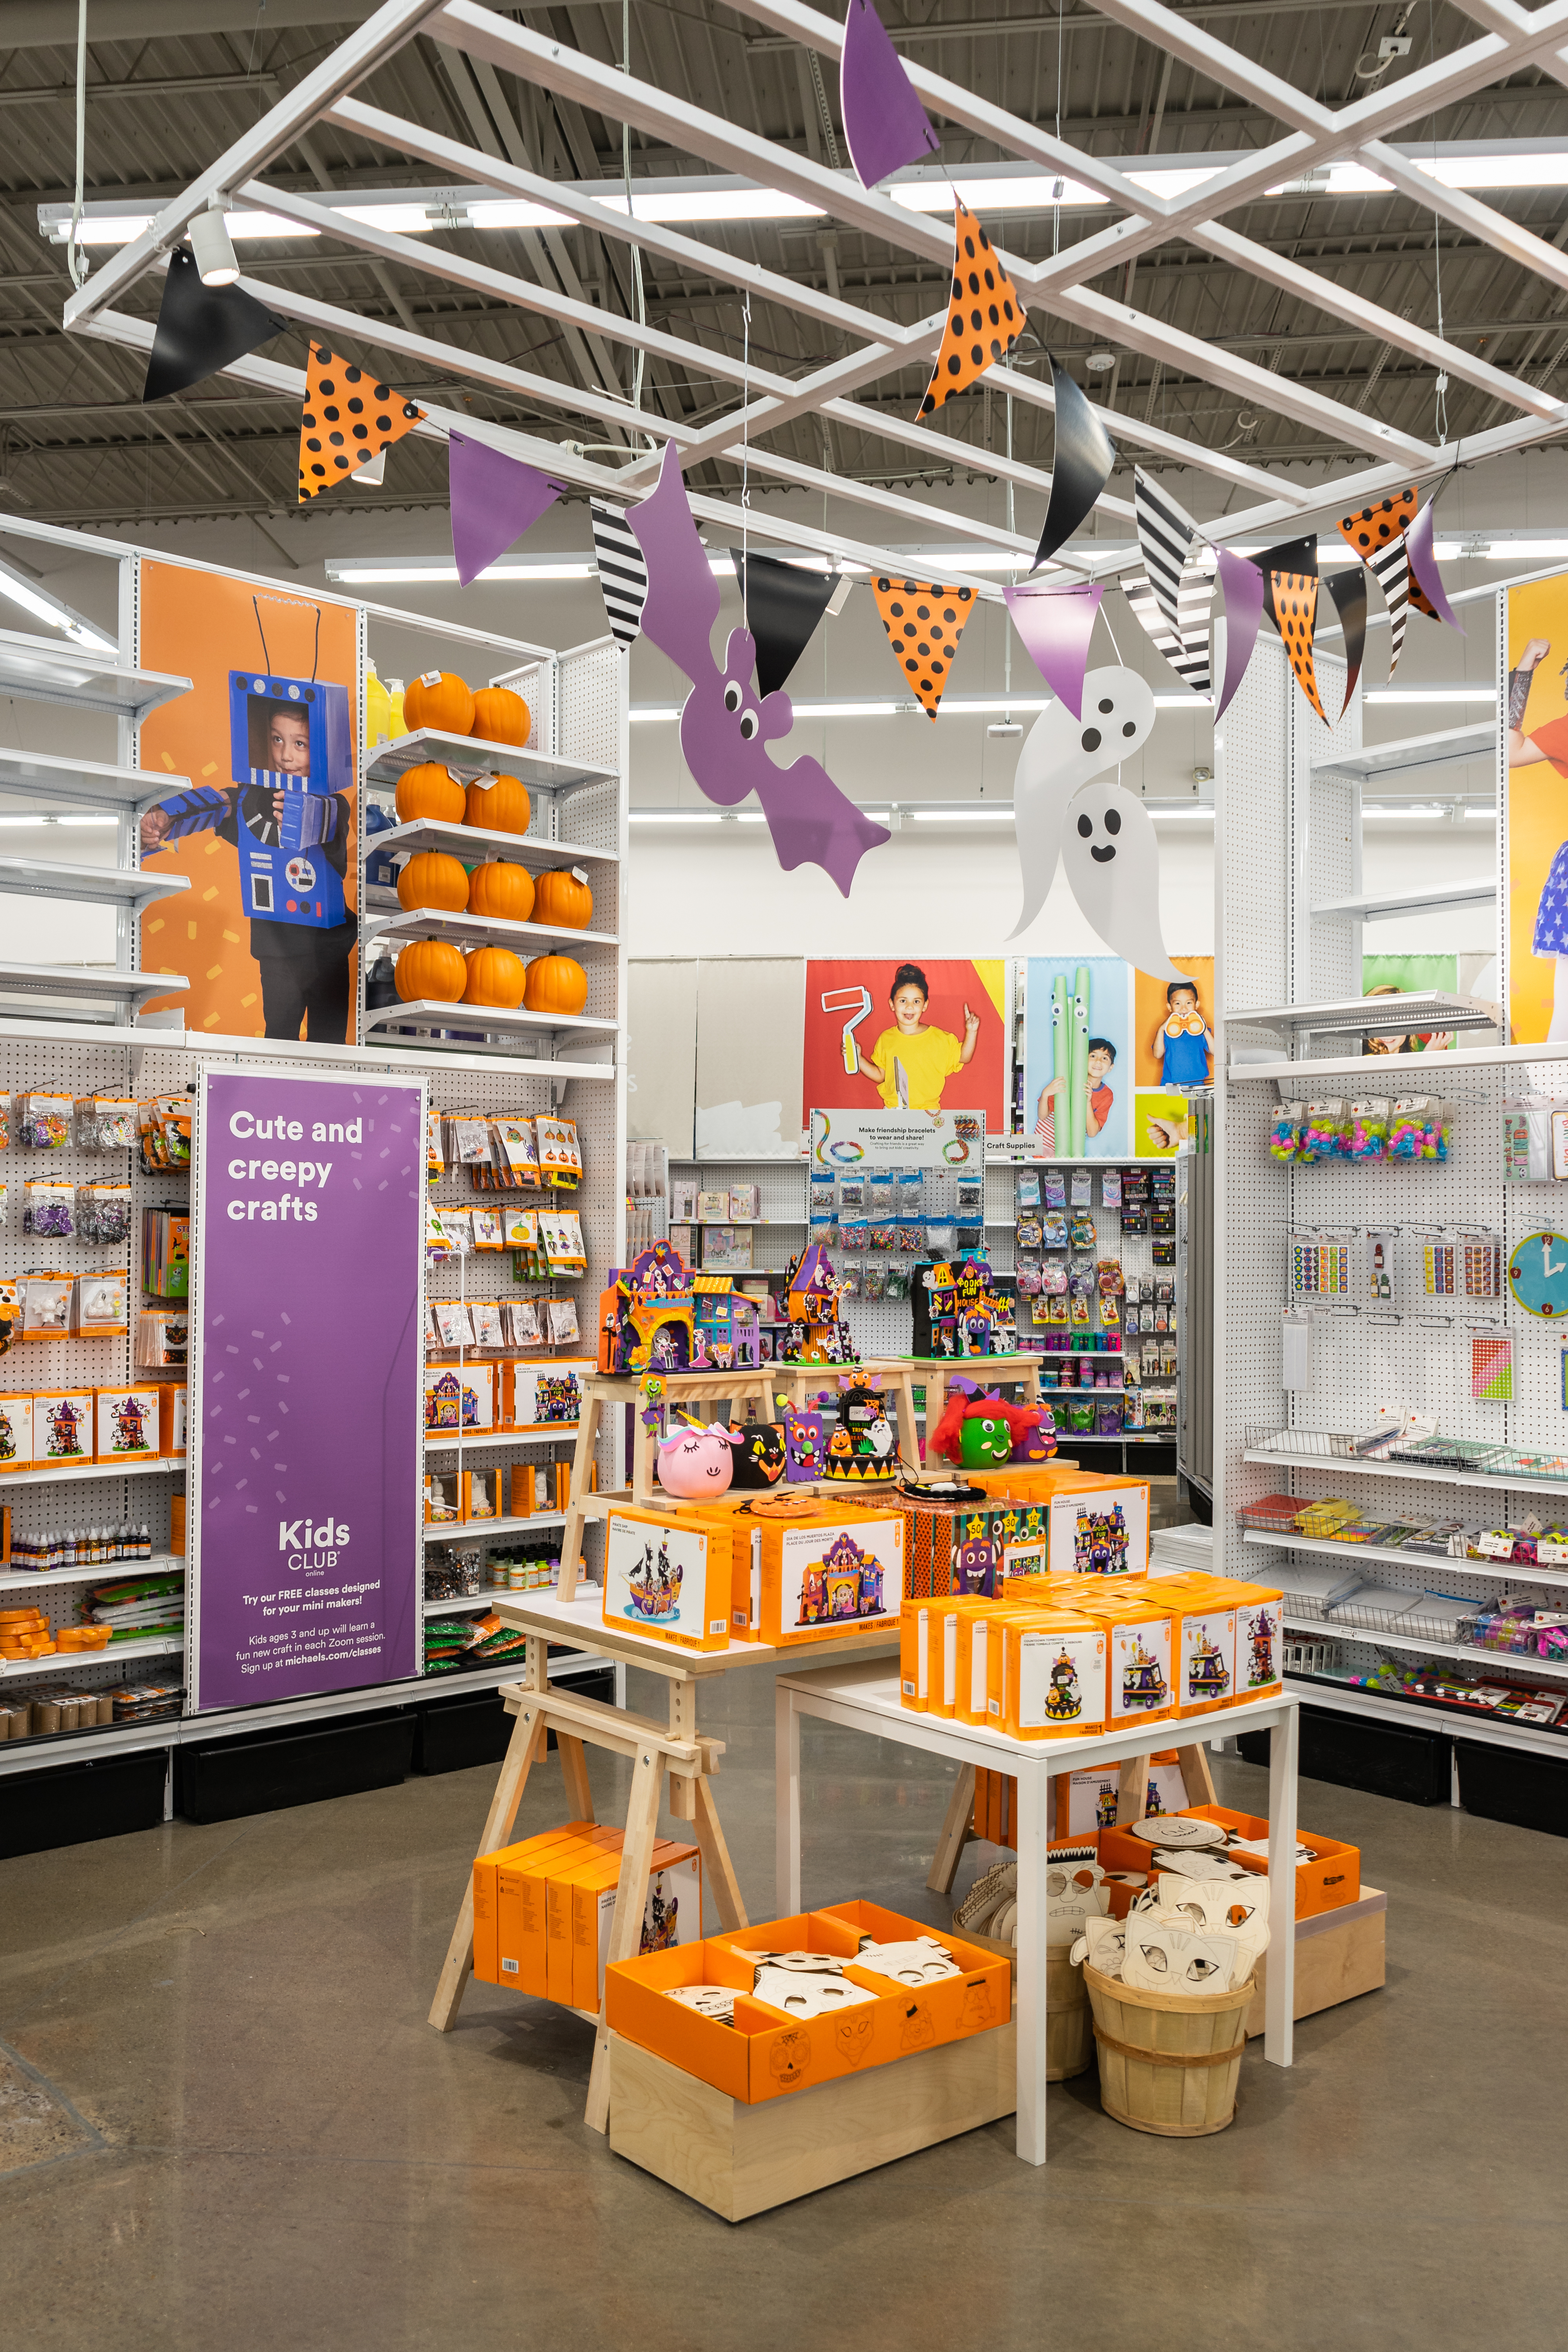 Michaels Unveils Two New Test and Learn Concept Stores in Texas